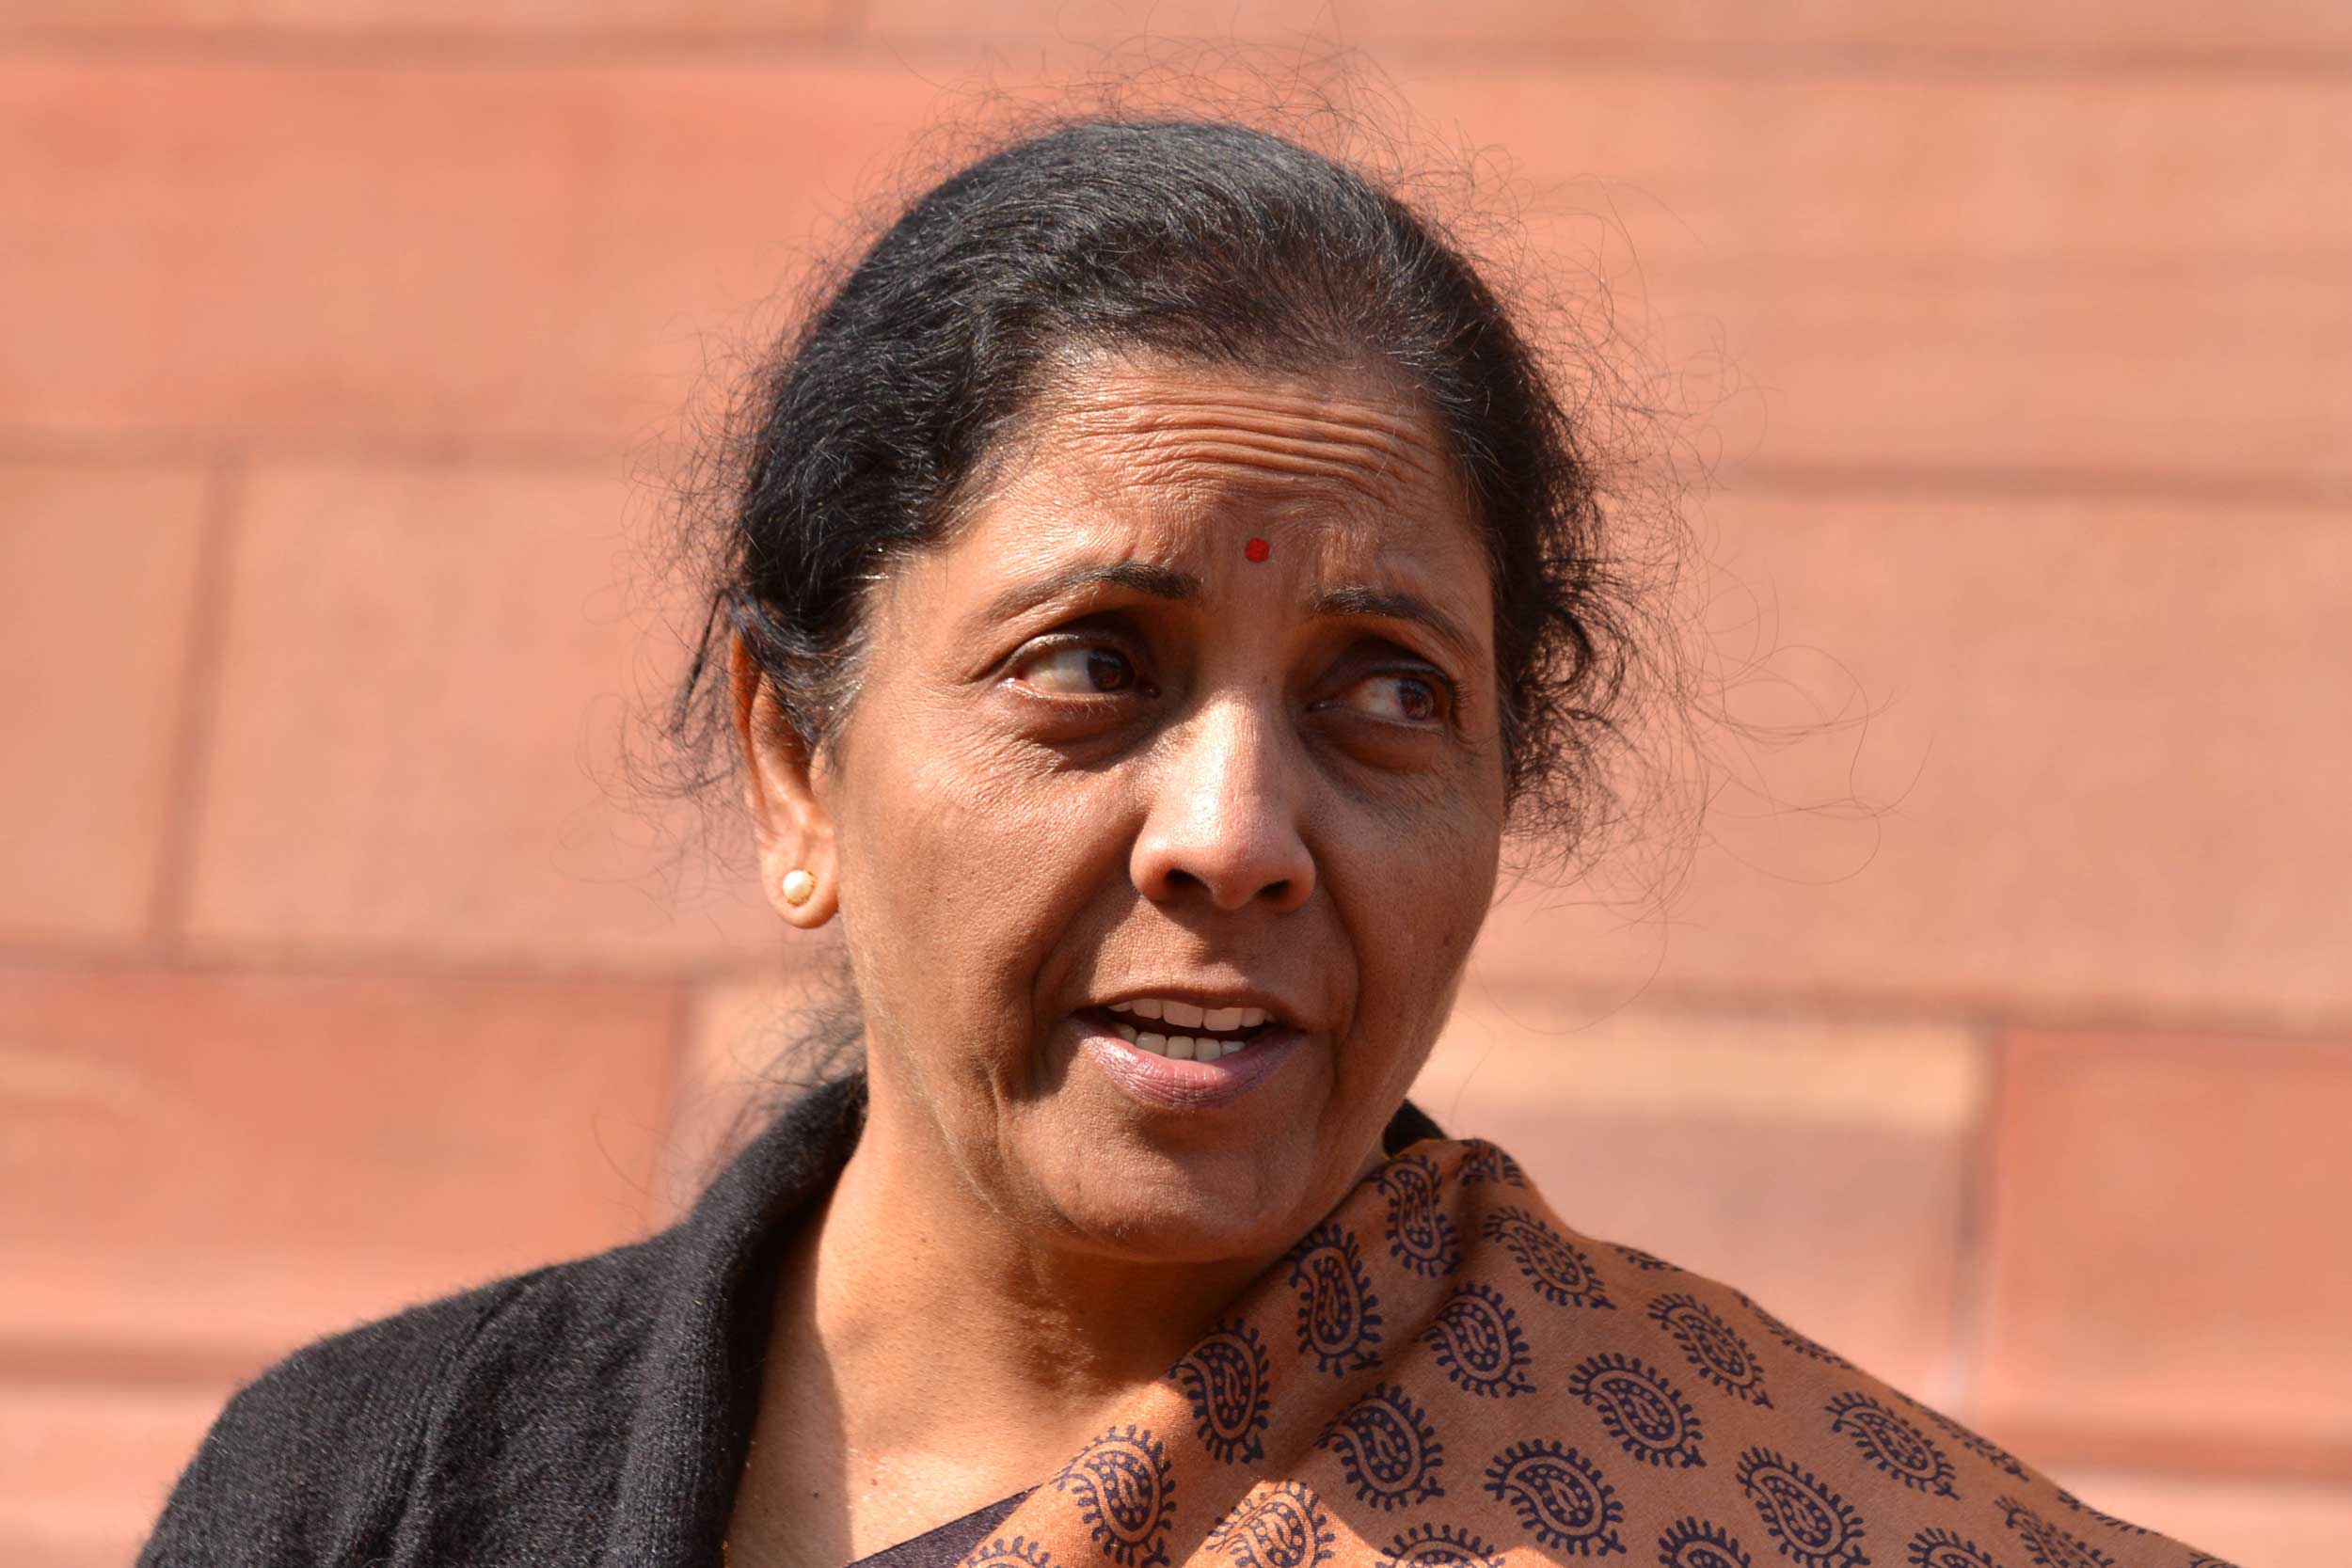 Union finance minister Nirmala Sitharaman’s Rs 70,000-crore bank recapitalisation announcement could see them come out of the mechanism, which places lending and other restrictions.
